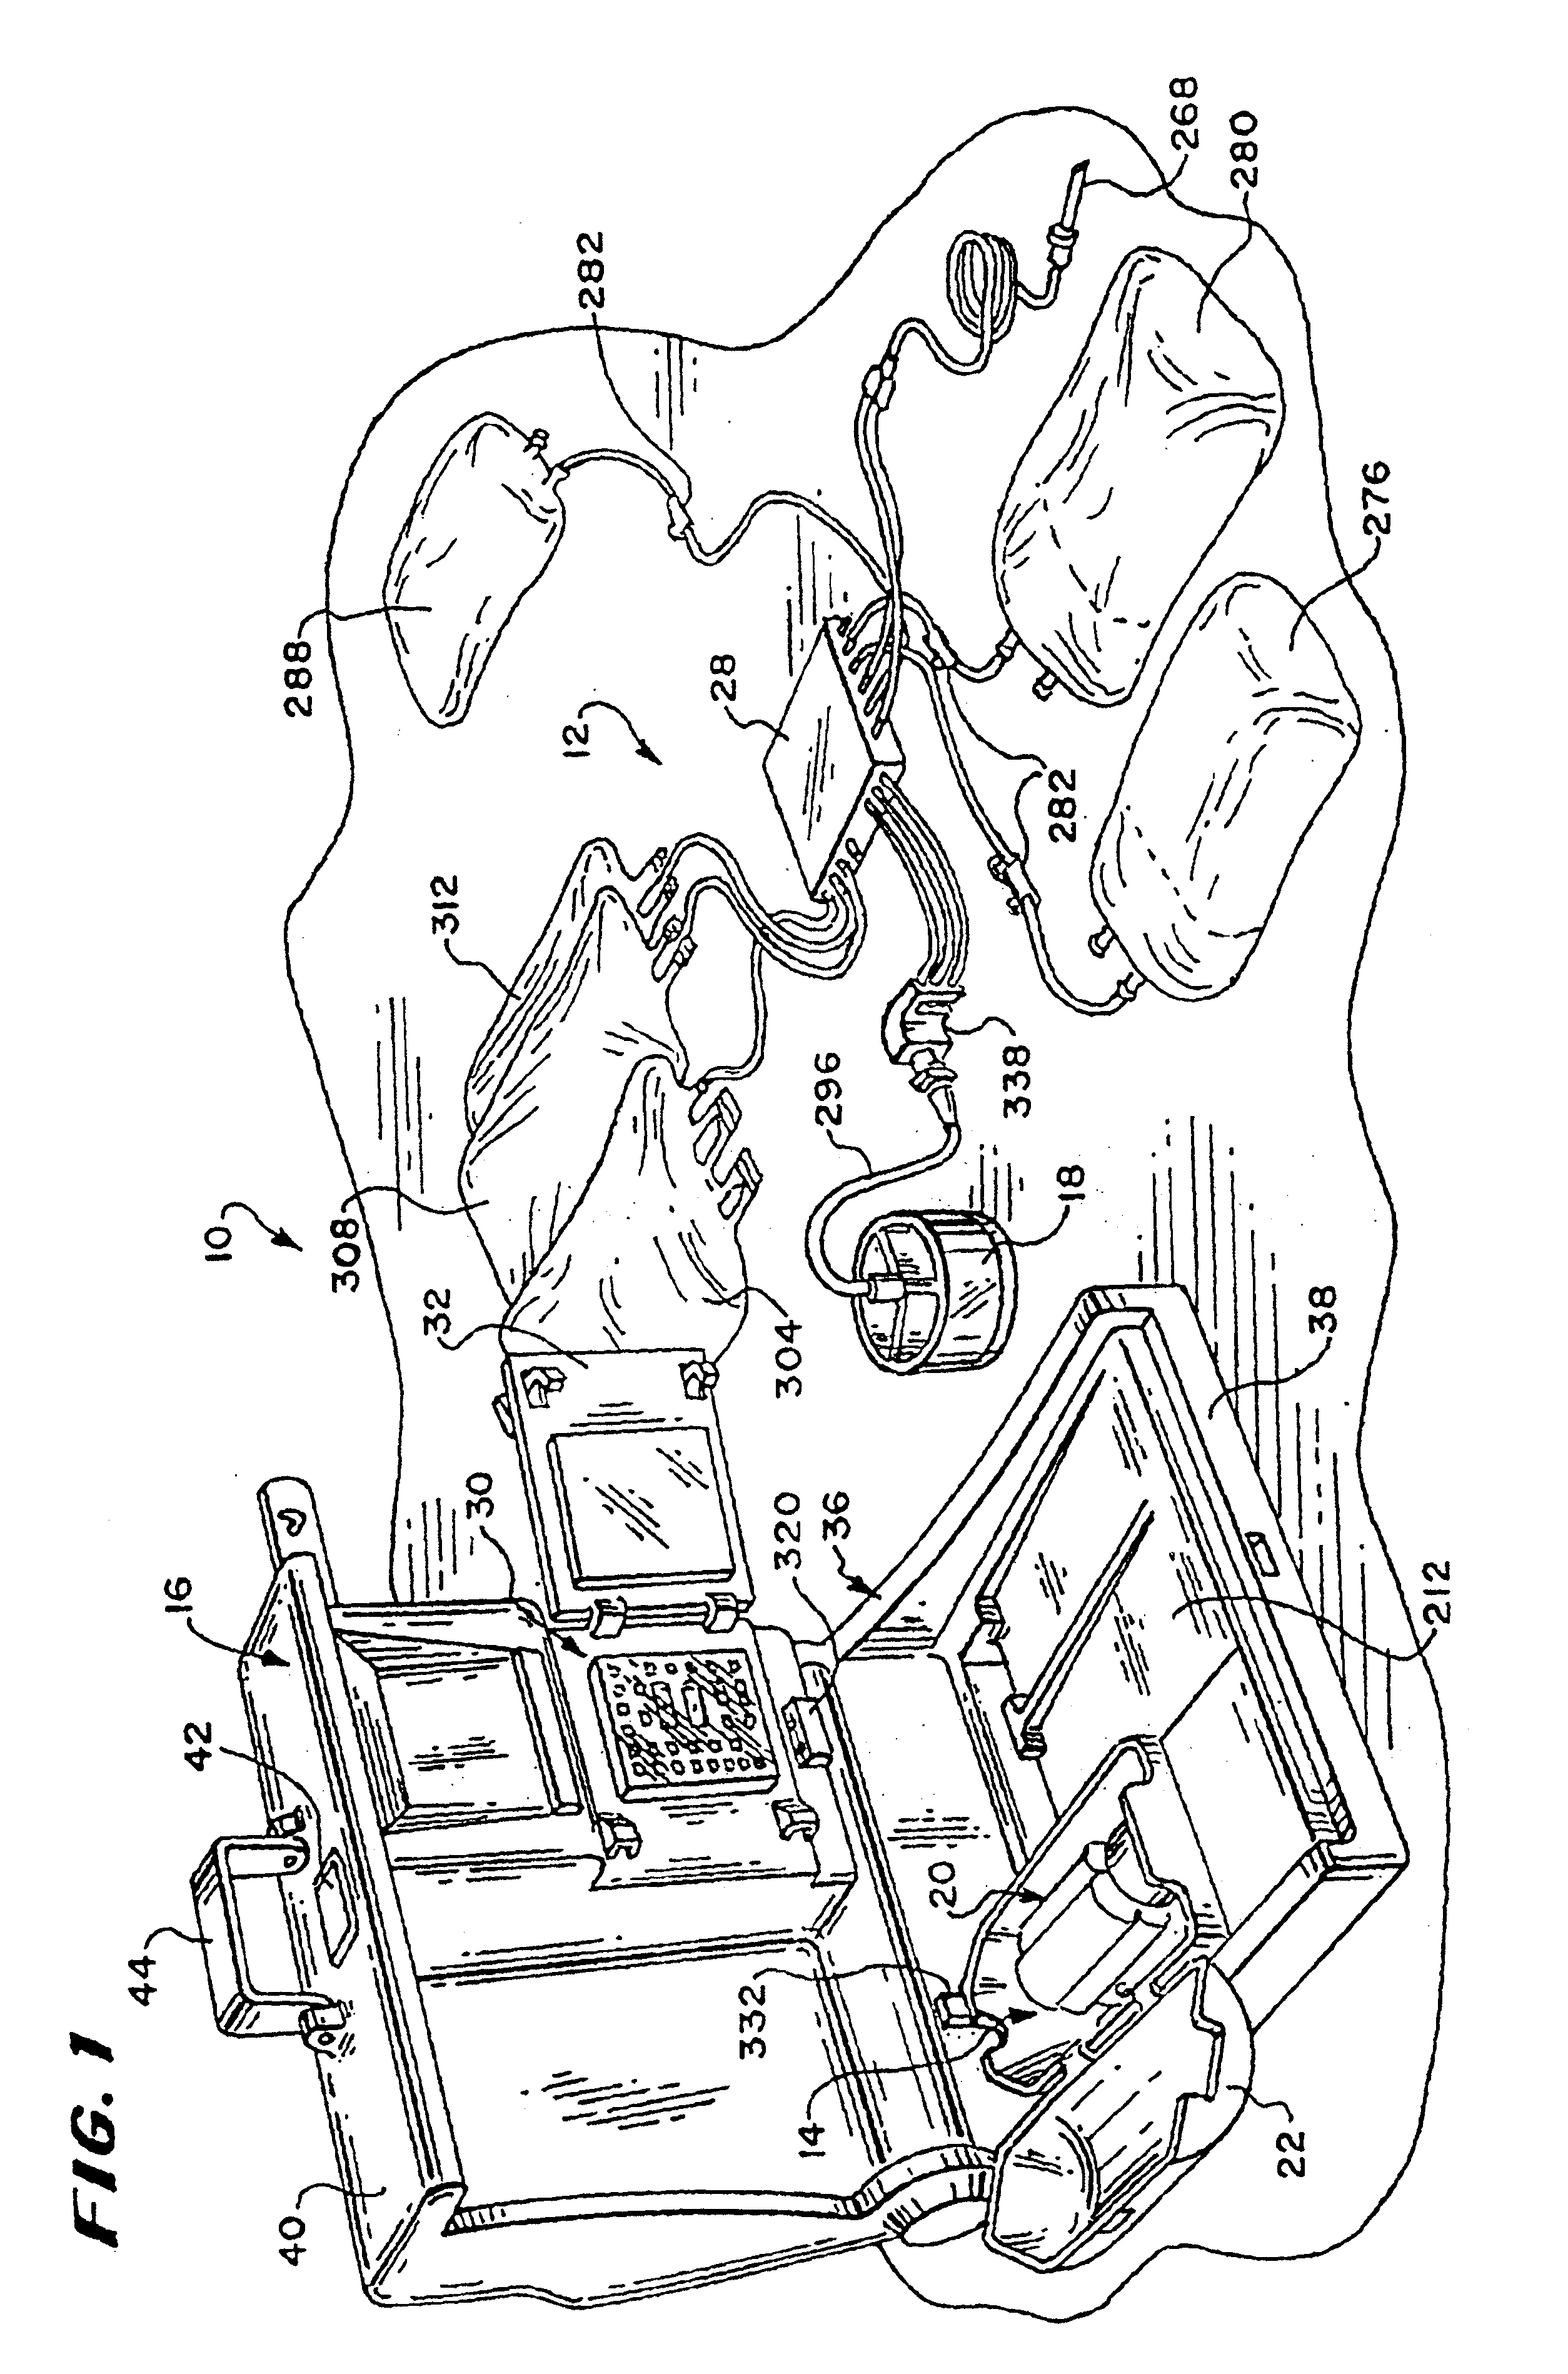 Systems and methods for control of pumps employing electrical field sensing